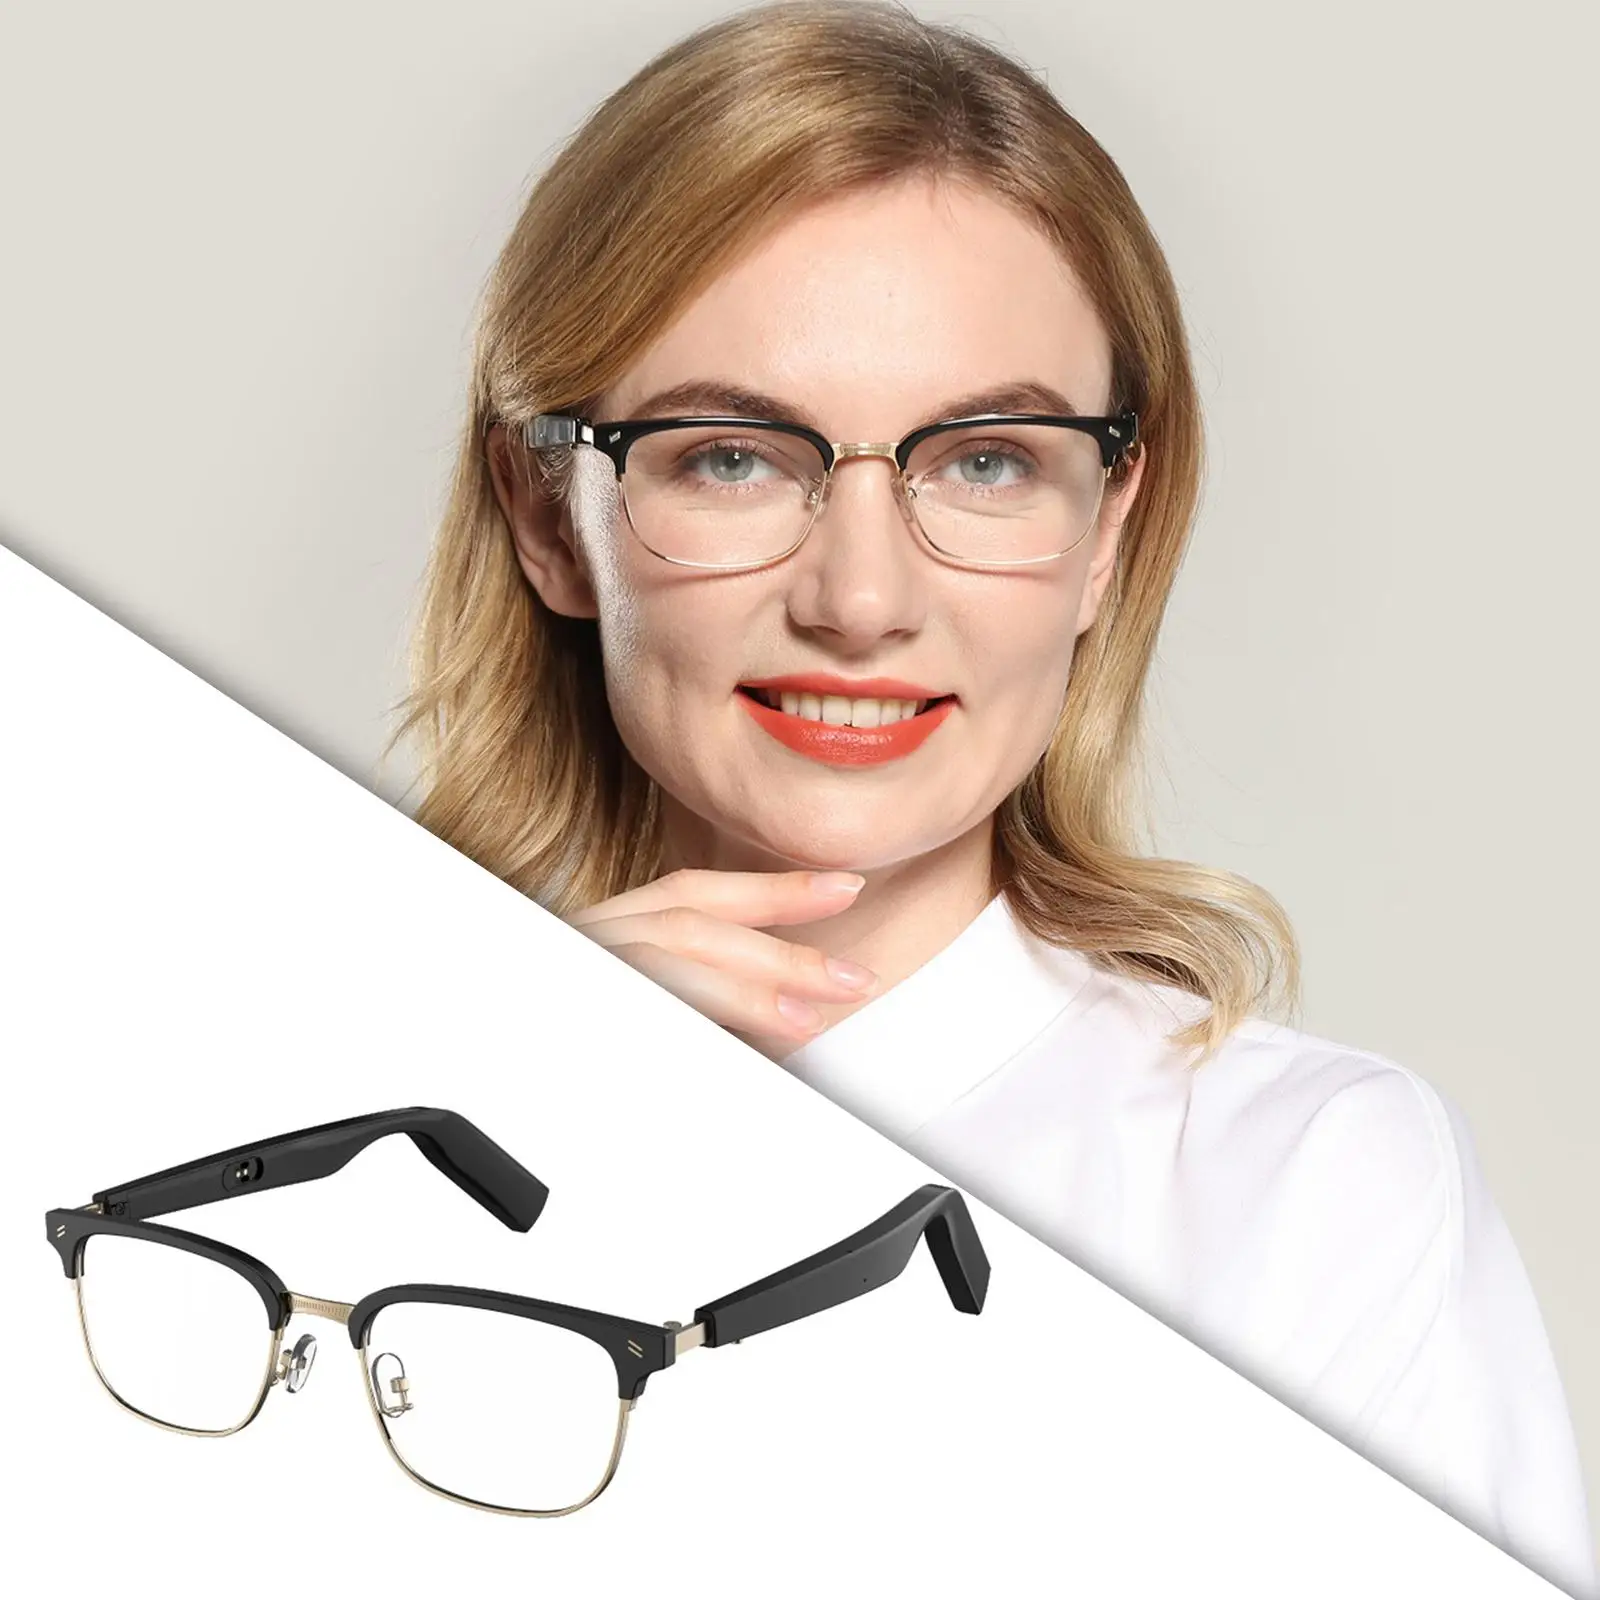  Glasses Voice Control Lightweight Lens for Meeting Traveling